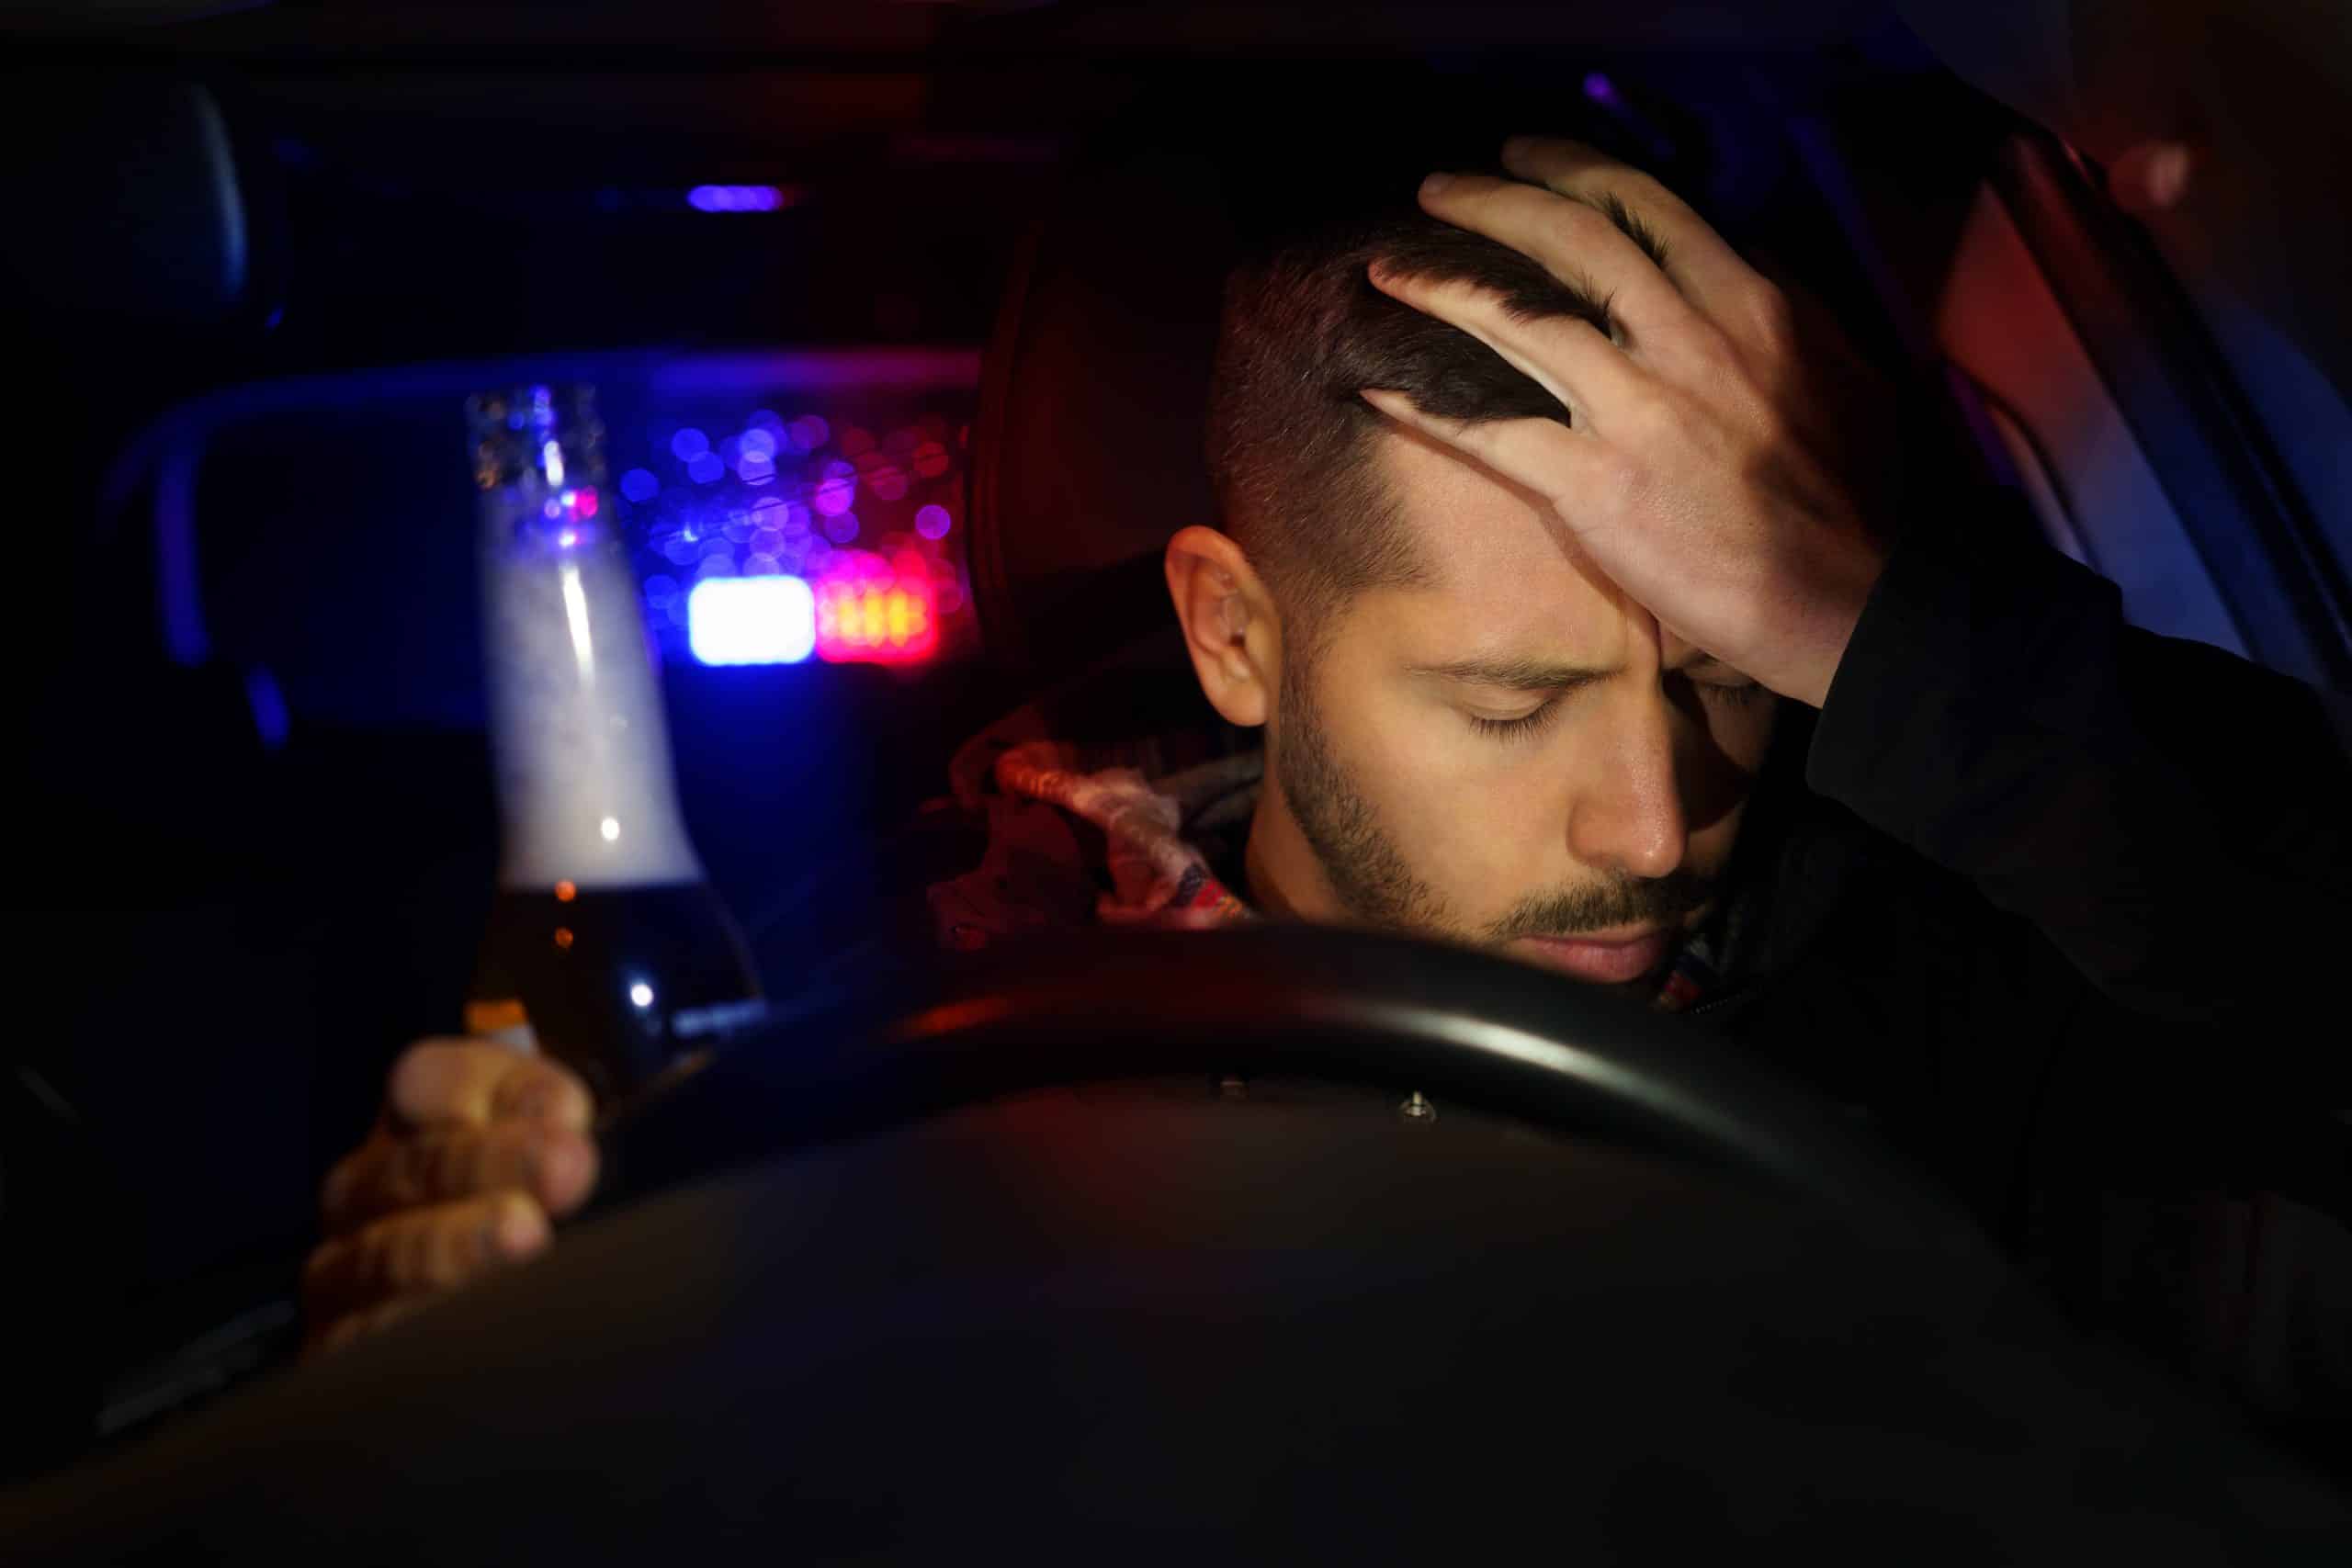 The potential outcomes of a DWI/DUI case with a skilled defense attorney